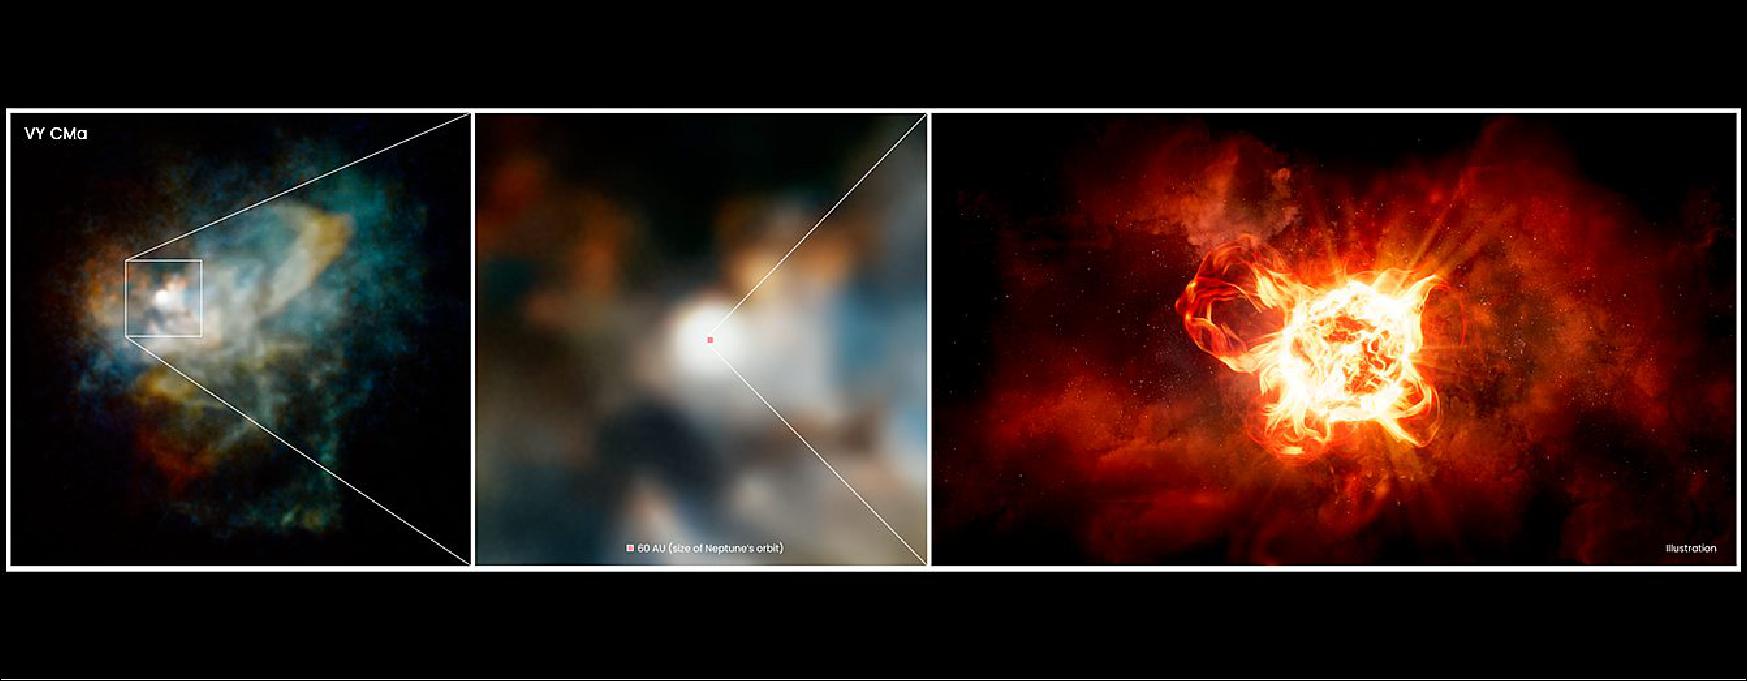 Figure 111: This zoom into VY Canis Majoris is a combination of Hubble imaging and an artist's impression. The left panel is a multicolor Hubble image of the huge nebula of material cast off by the hypergiant star. This nebula is approximately a trillion miles across. The middle panel is a close-up Hubble view of the region around the star. This image reveals close-in knots, arcs, and filaments of material ejected from the star as it goes through its violent process of casting off material into space. VY Canis Majoris is not seen in this view, but the tiny red square marks the location of the hypergiant, and represents the diameter of the solar system out to the orbit of Neptune, which is 5.5 billion miles across. The final panel is an artist's impression of the hypergiant star with vast convection cells and undergoing violent ejections. VY Canis Majoris is so large that if it replaced the Sun, the star would extend for hundreds of millions of miles, to between the orbits of Jupiter and Saturn [image credit: NASA, ESA, and R. Humphreys (University of Minnesota), and J. Olmsted (STScI)]